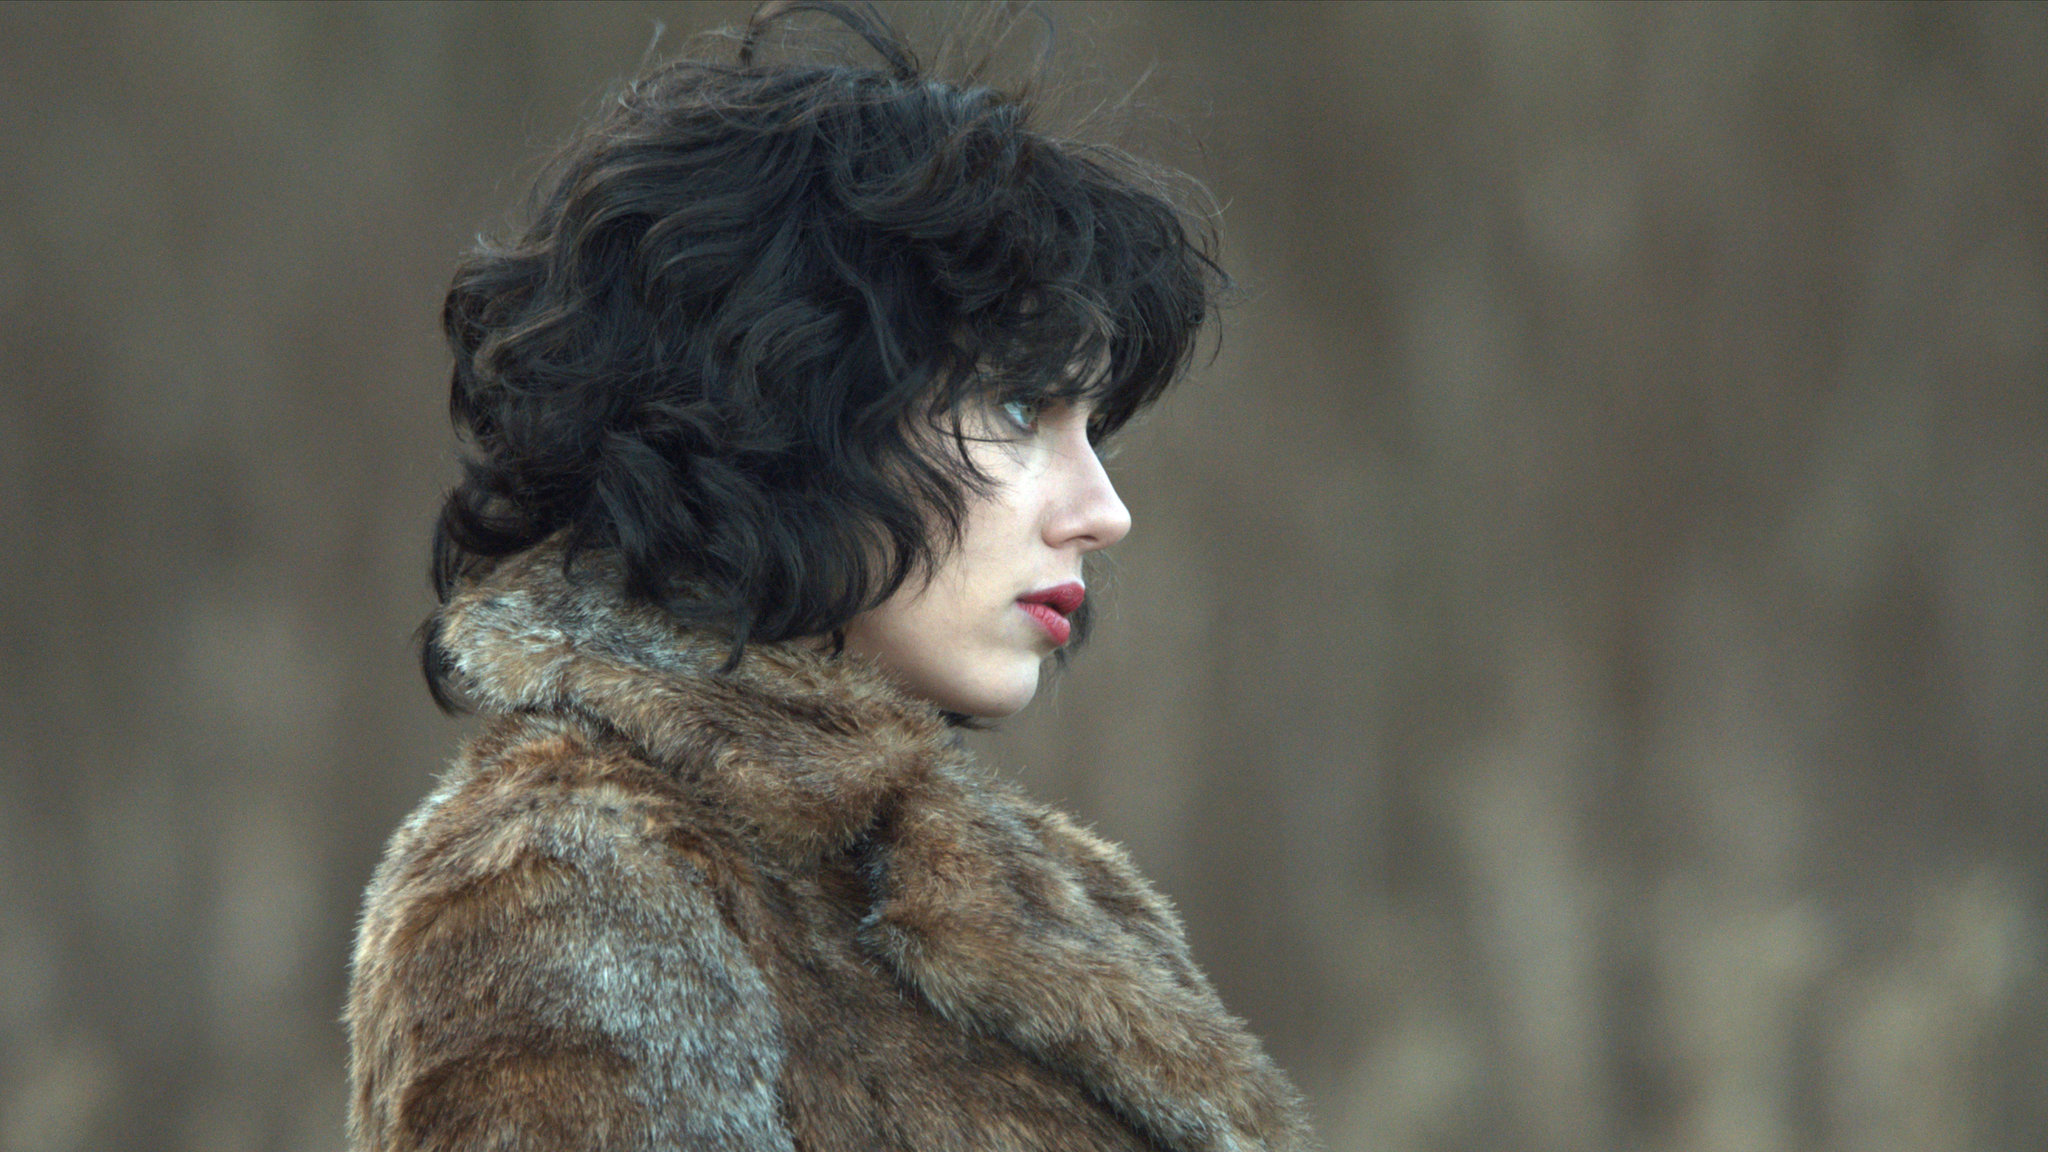 chris mullet recommends Under The Skin Scarlett Pics